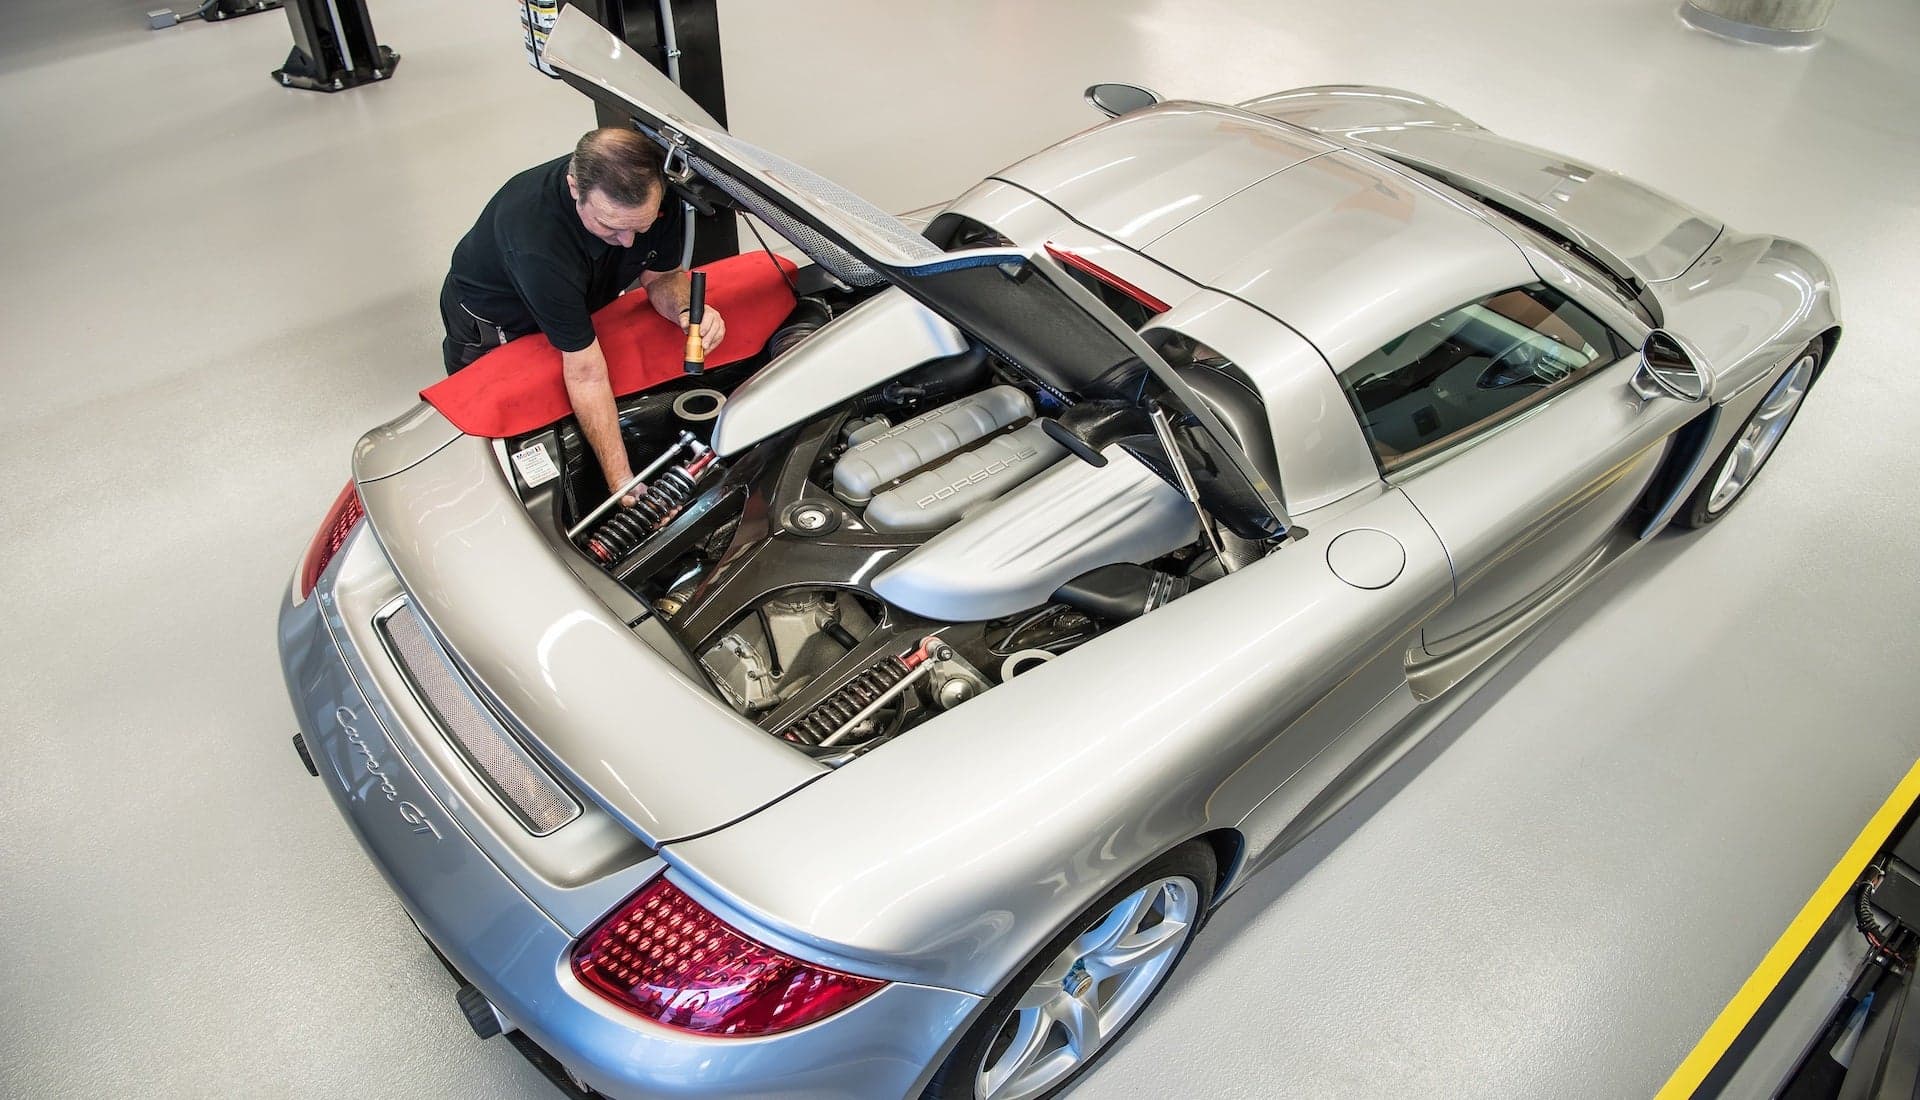 This Porsche Carrera GT Used to Train Technicians Has Been Disassembled 78 Times